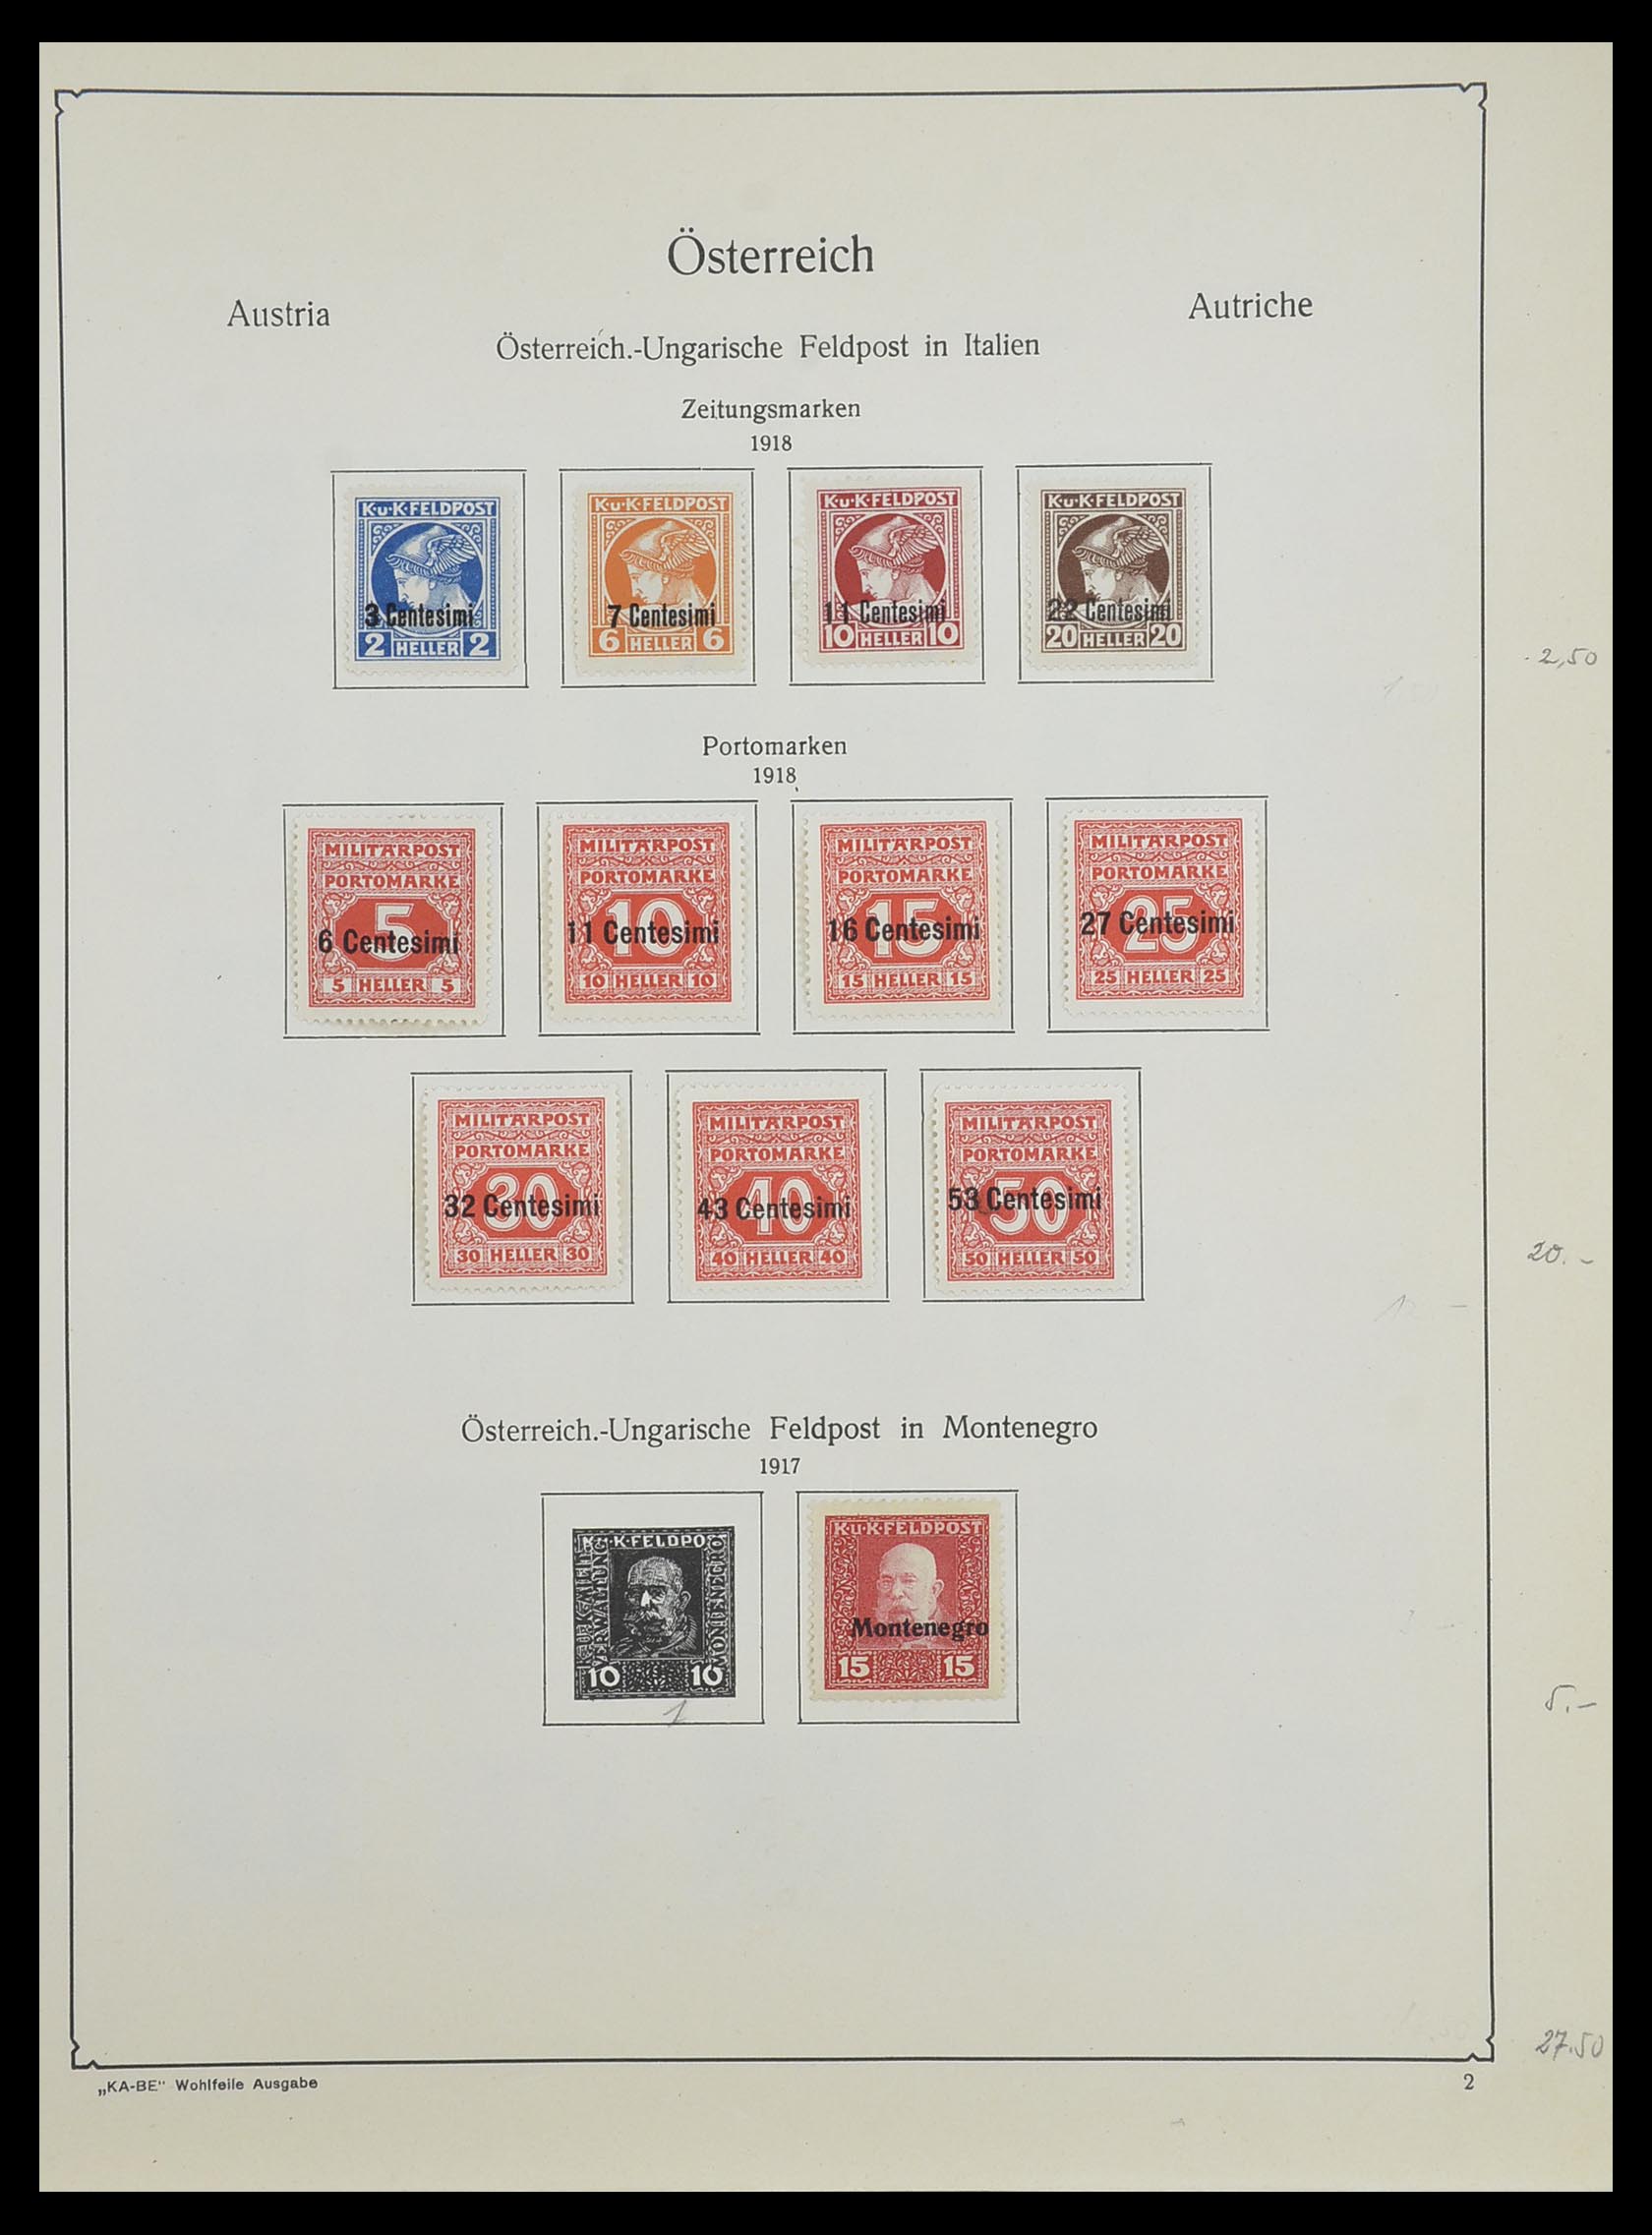 33593 088 - Stamp collection 33593 Austria and territories 1850-1959.